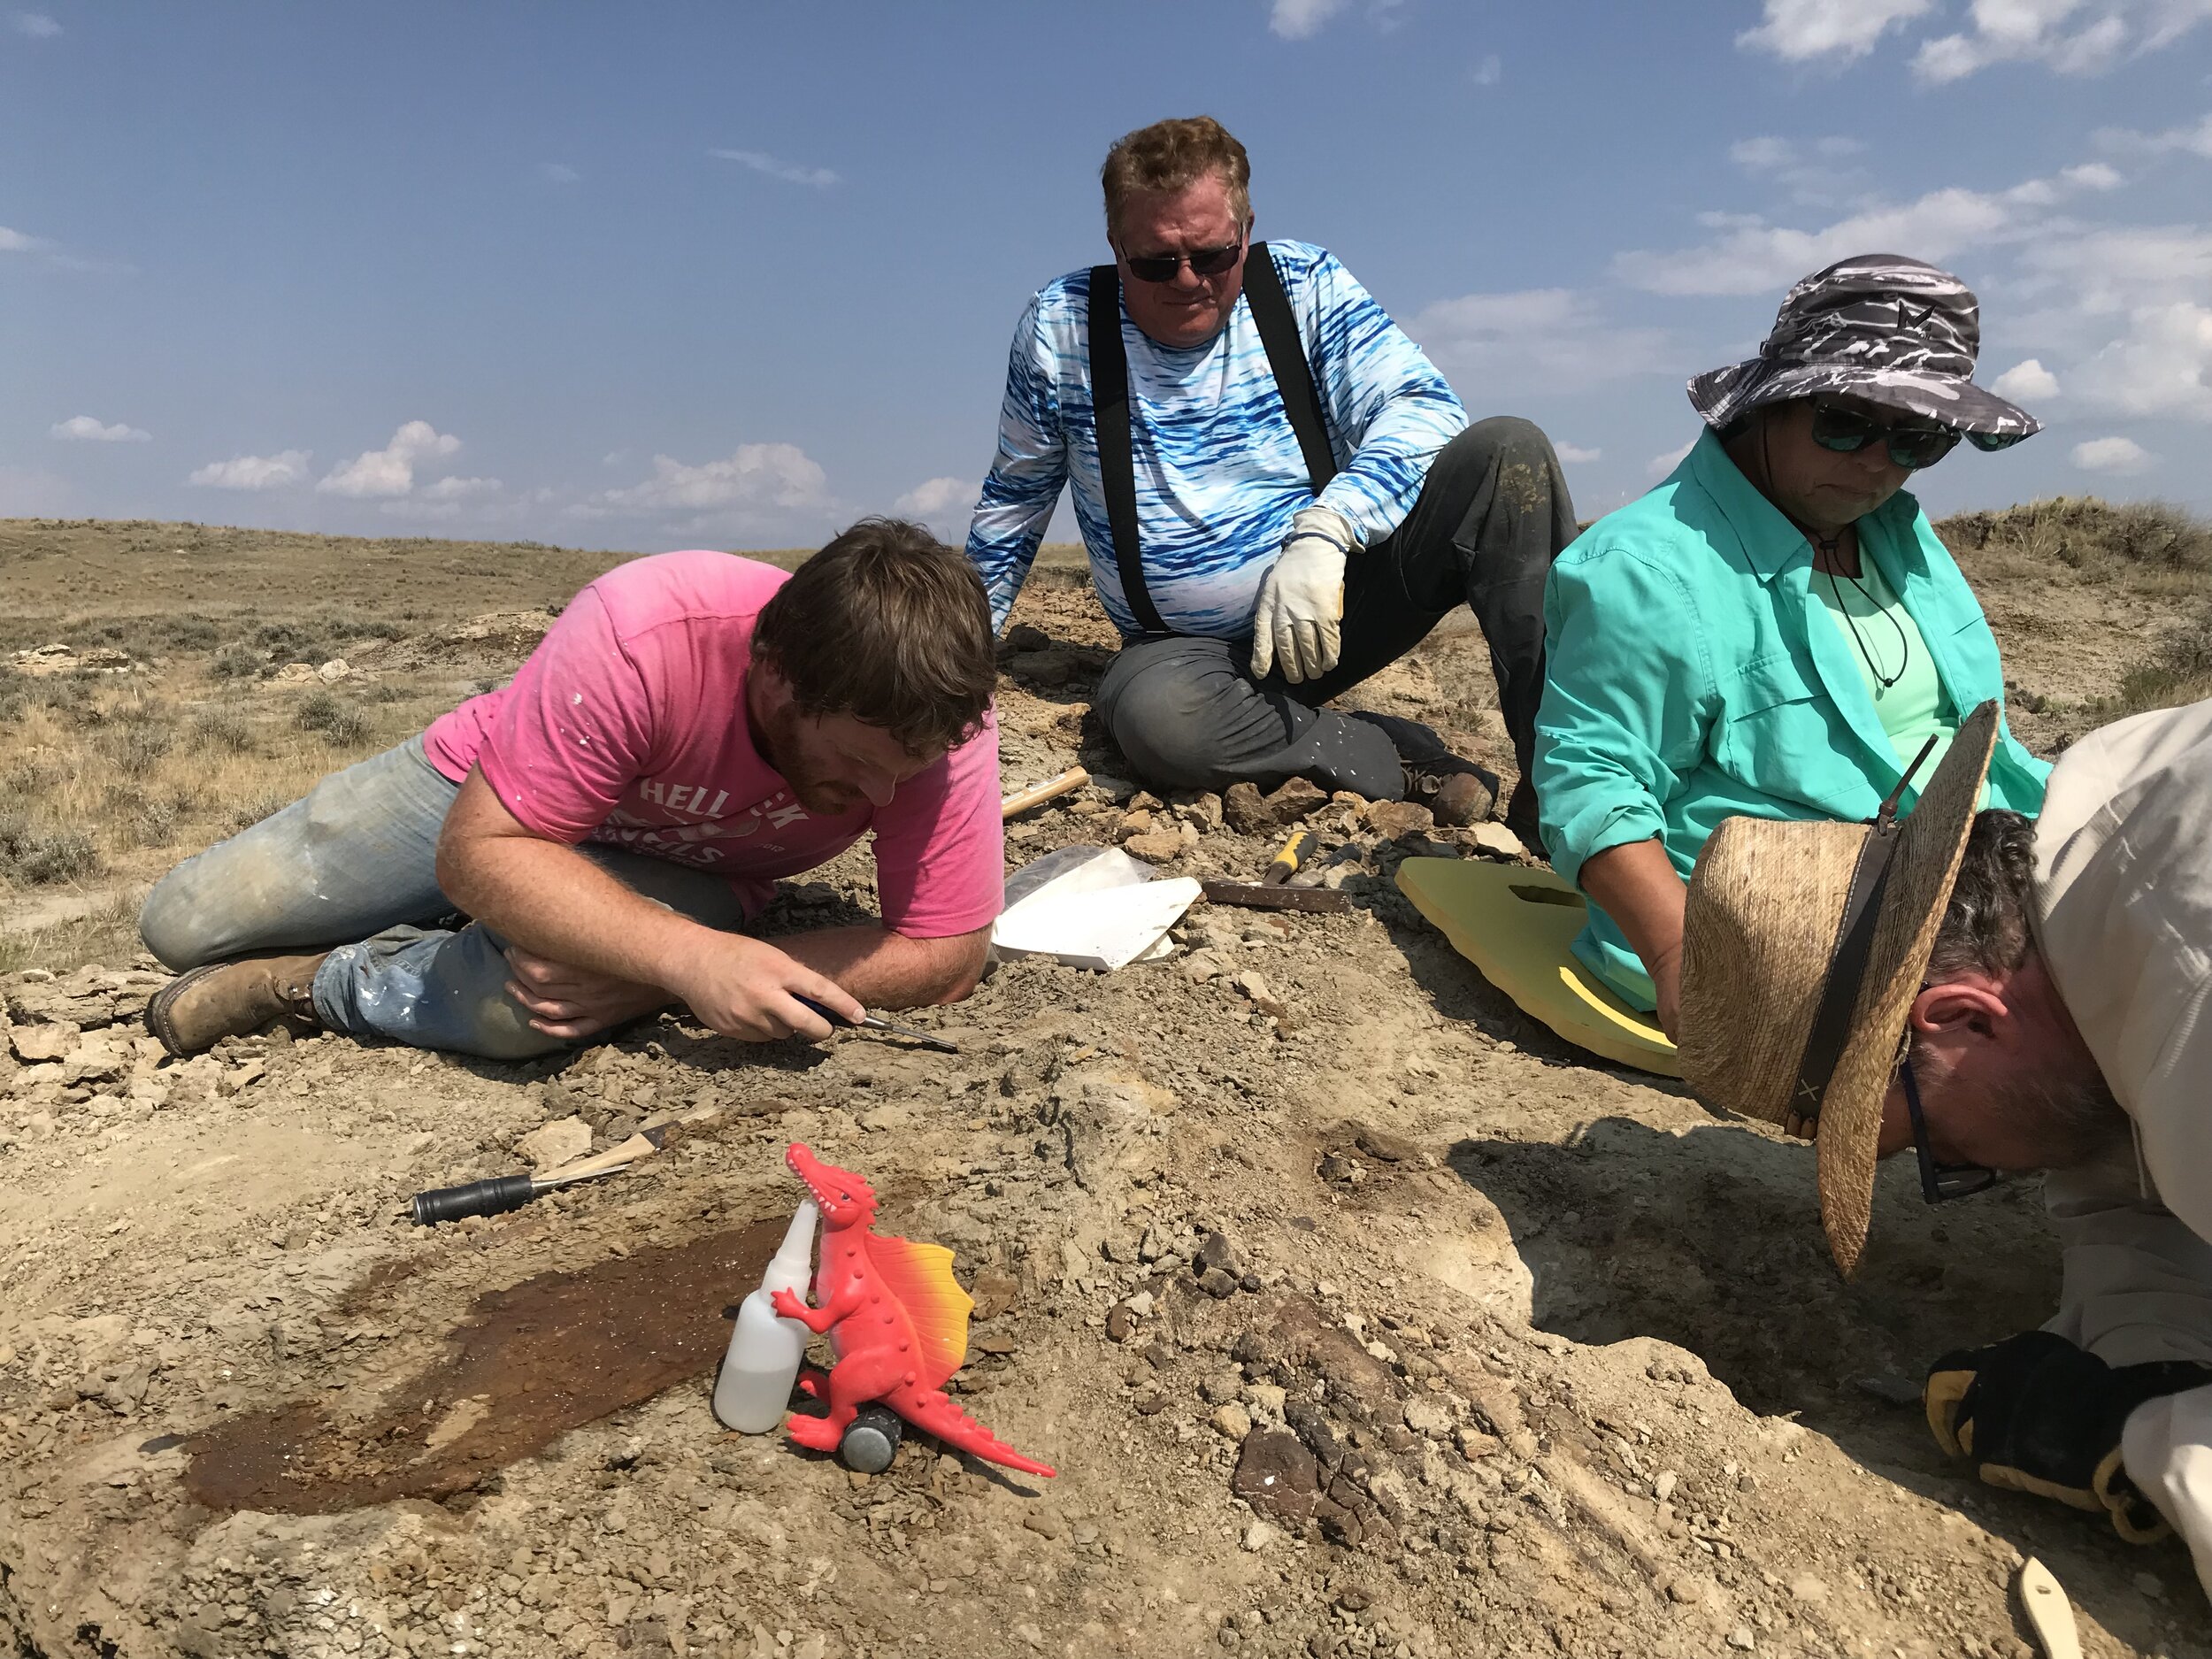 Dig up dinosaur bones and other fossils with Hell Creek Fossils